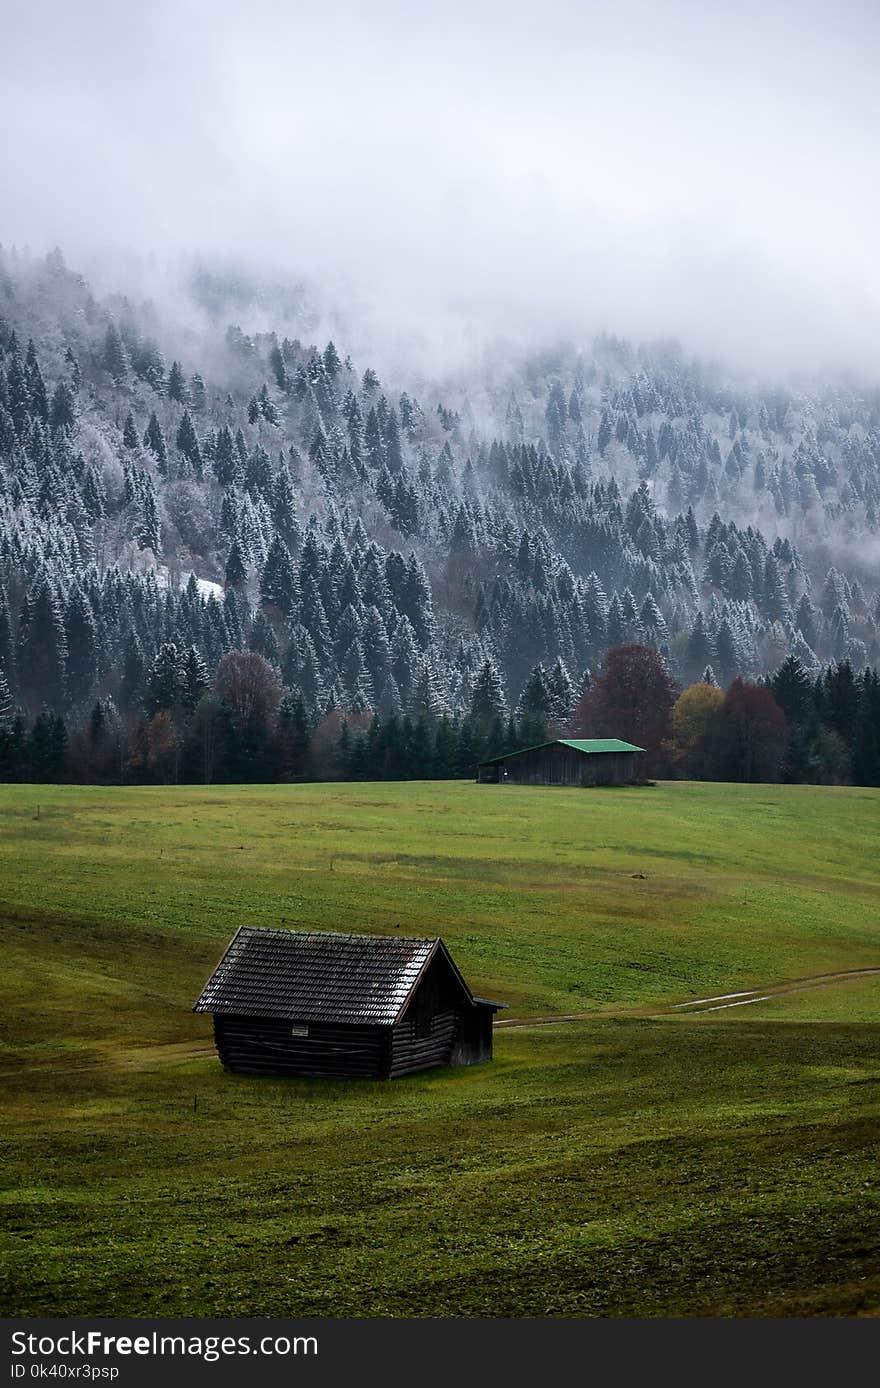 Geroldsee forest during autumn day with first snow and fog over trees, Bavarian Alps, Bavaria, Germany. Dramatic balance between forest and field. Typical autumn landscape.